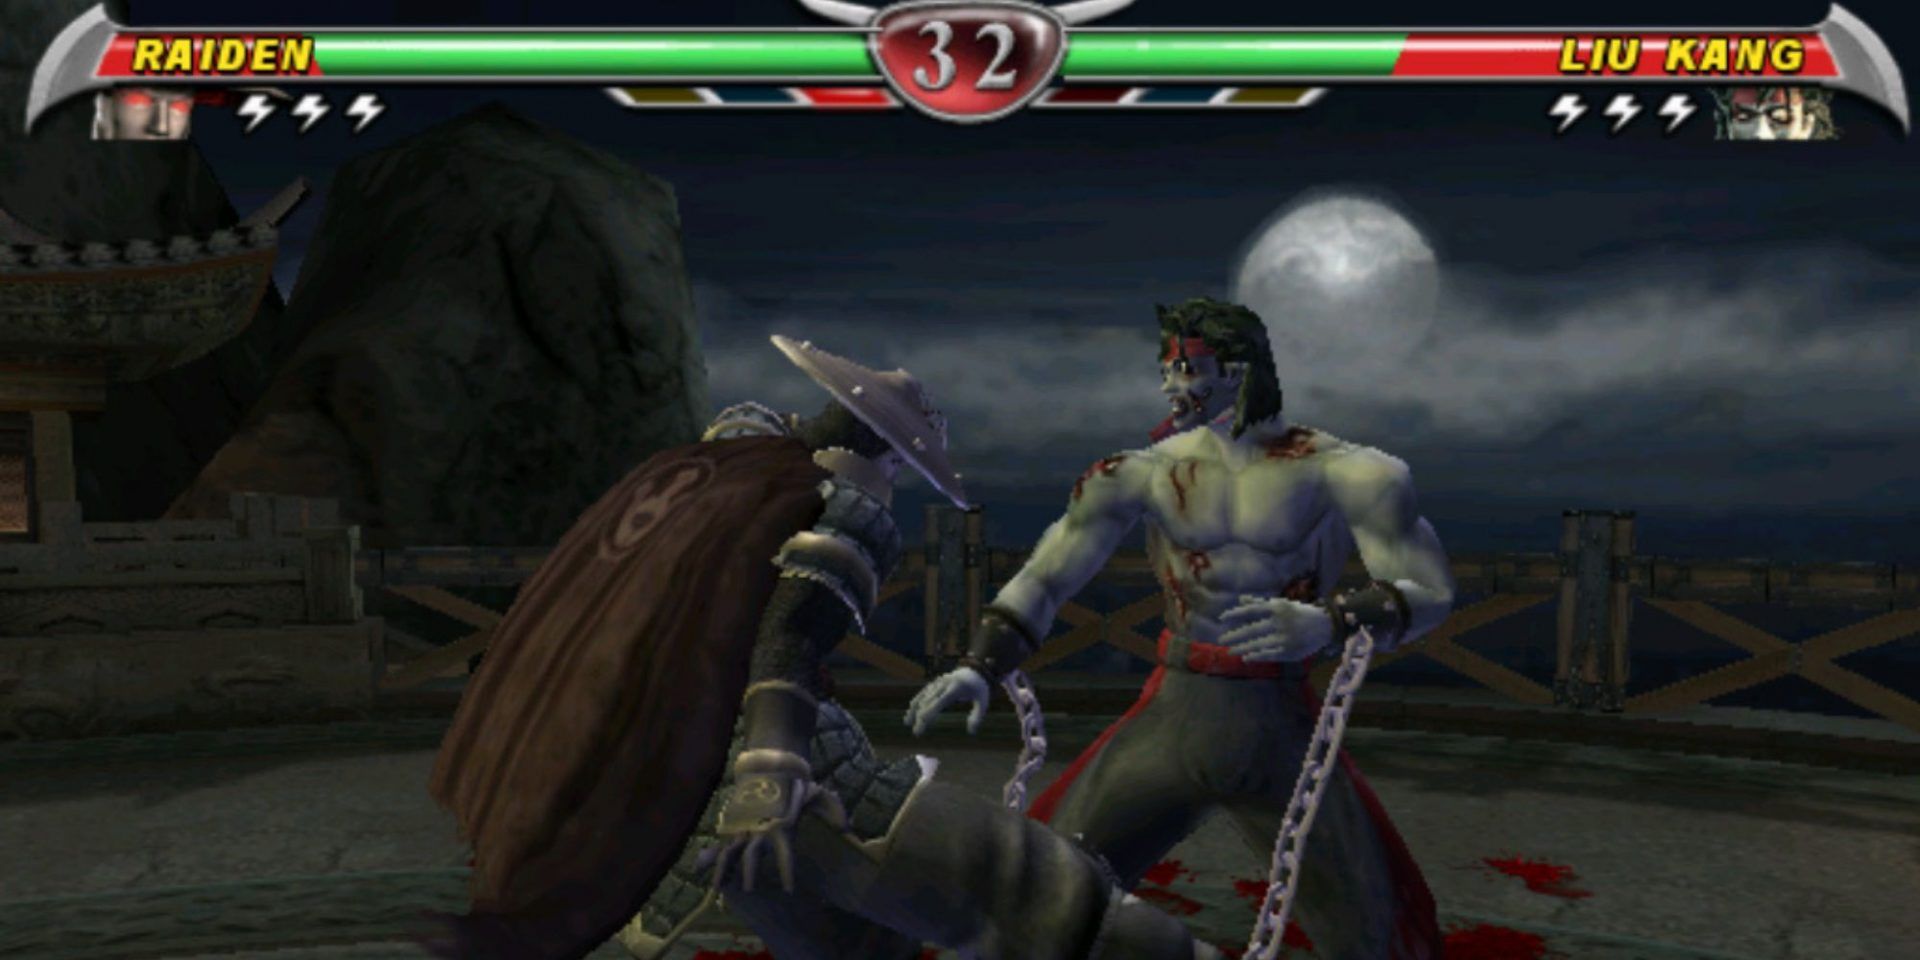 Raiden looks to win the second round against Liu Kang who is now a zombie.